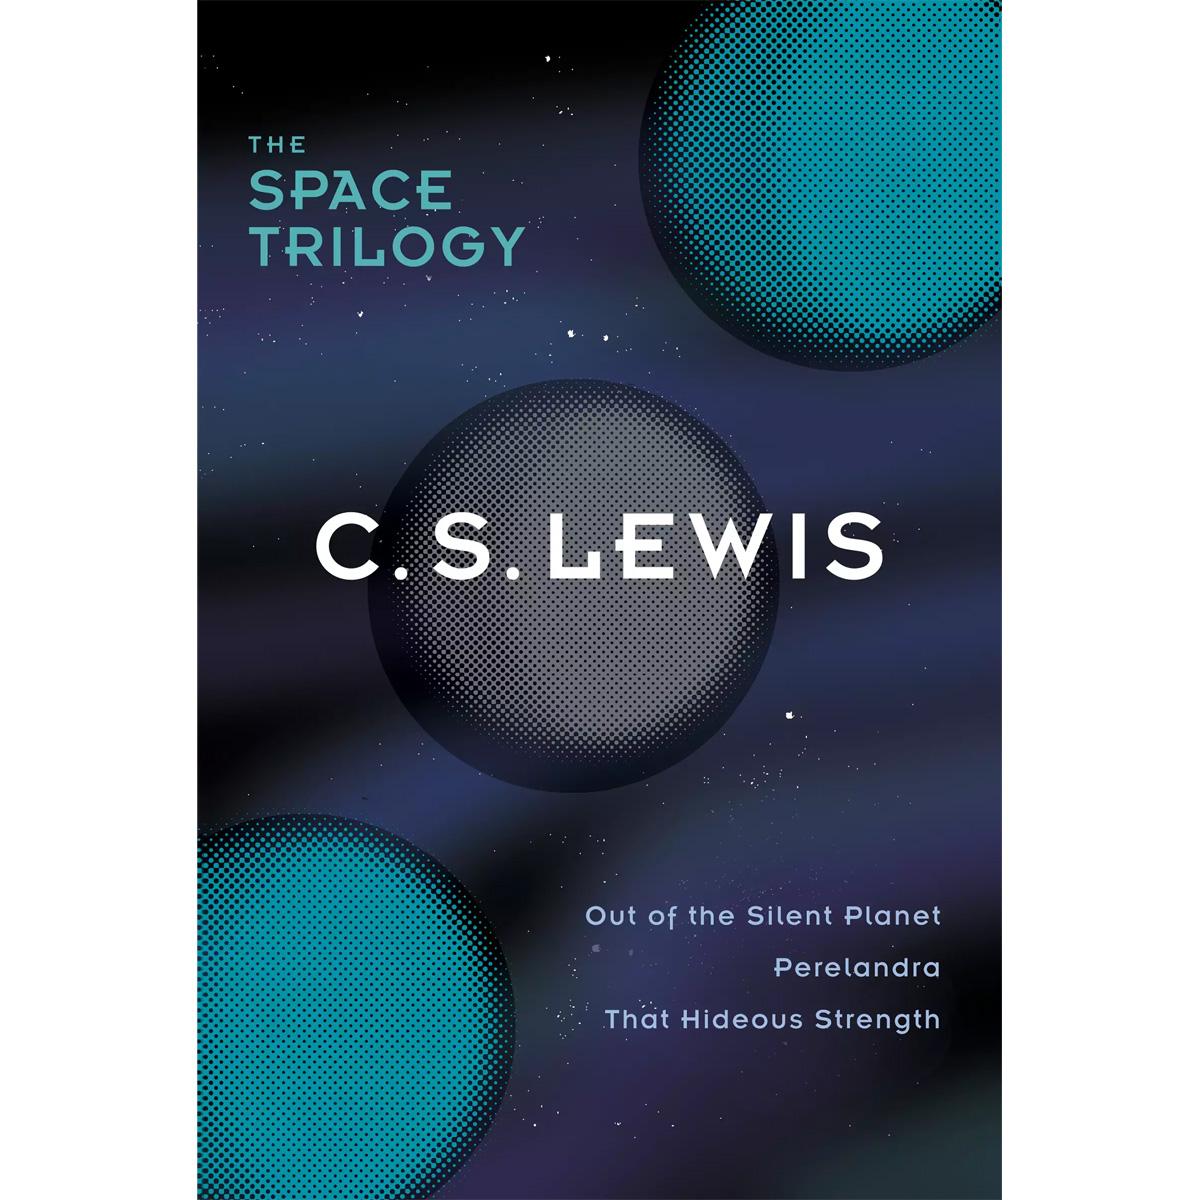 C. S. Lewis The Space Trilogy Omnibus eBook for $2